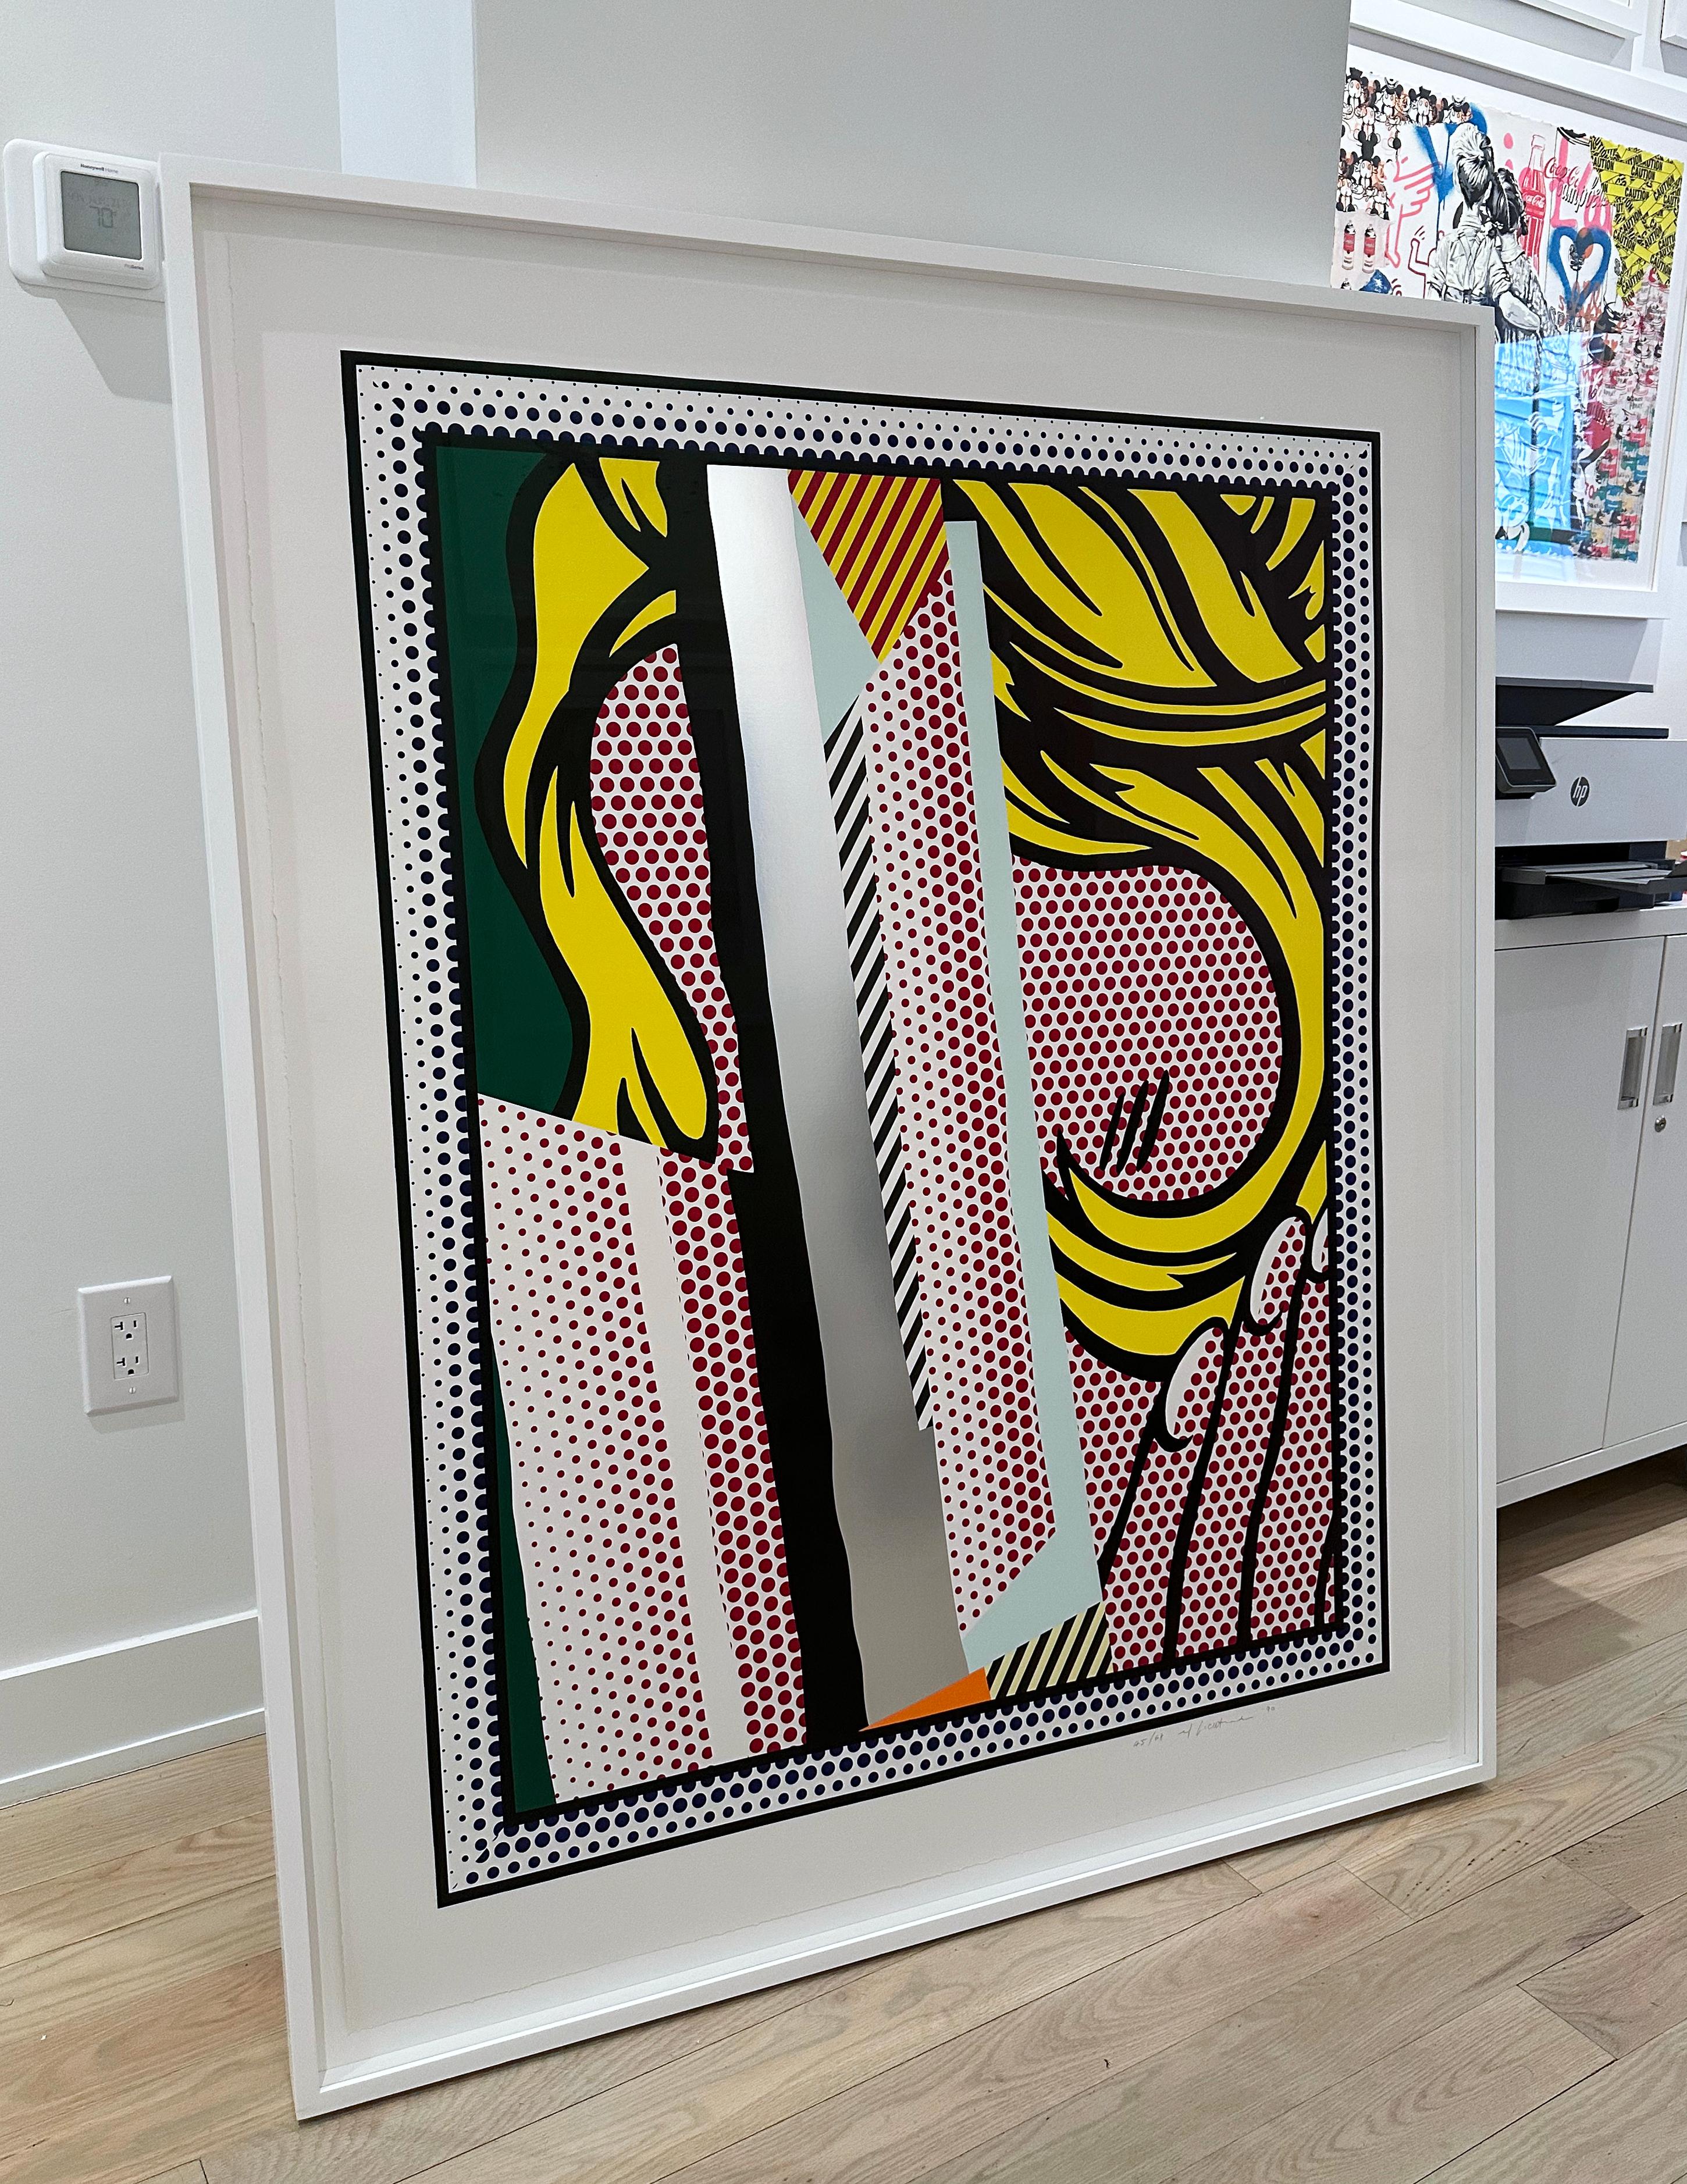 Artist: Roy Lichtenstein
Title: Reflections on Hair
Portfolio: Reflections
Medium: Lithograph, screenprint, relief and metalized PVC collage with embossing on mold-made Somerset paper
Year: 1990
Edition: 45/68
Frame Size: 60